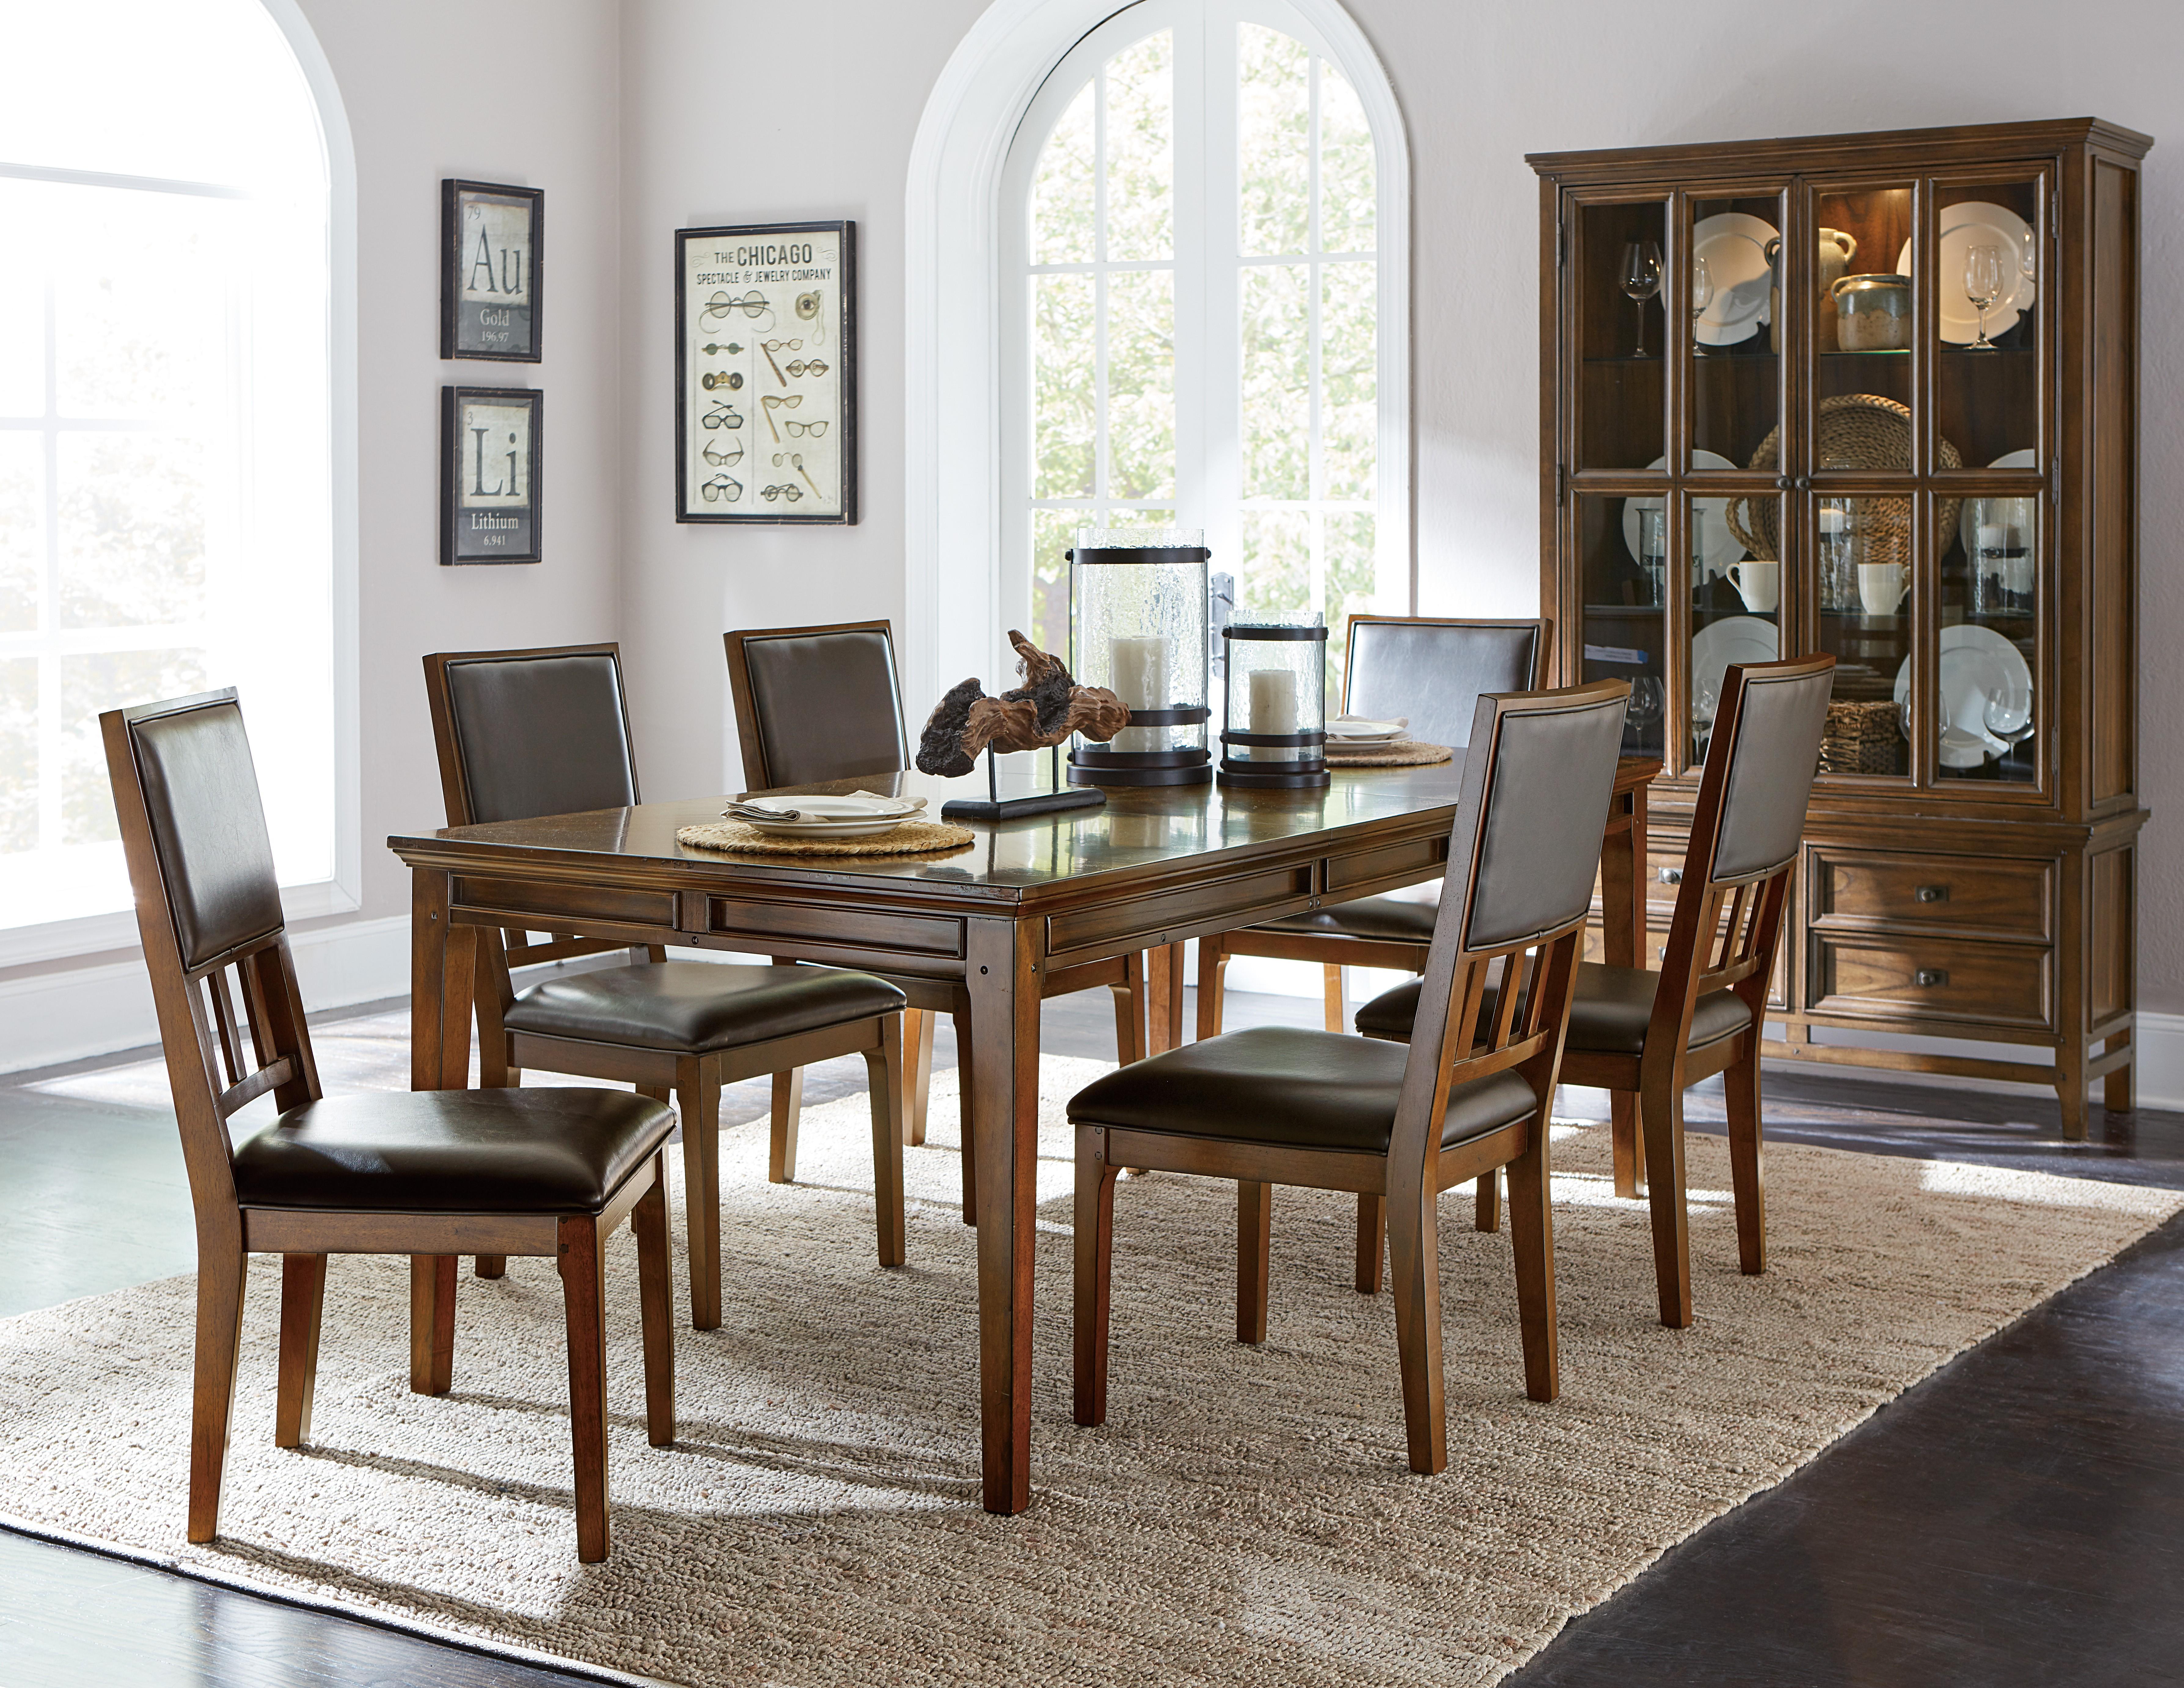 

    
1649-82*5 Traditional Brown Cherry Wood Dining Room Set 5pcs Homelegance 1649-82*5 Frazier Park
